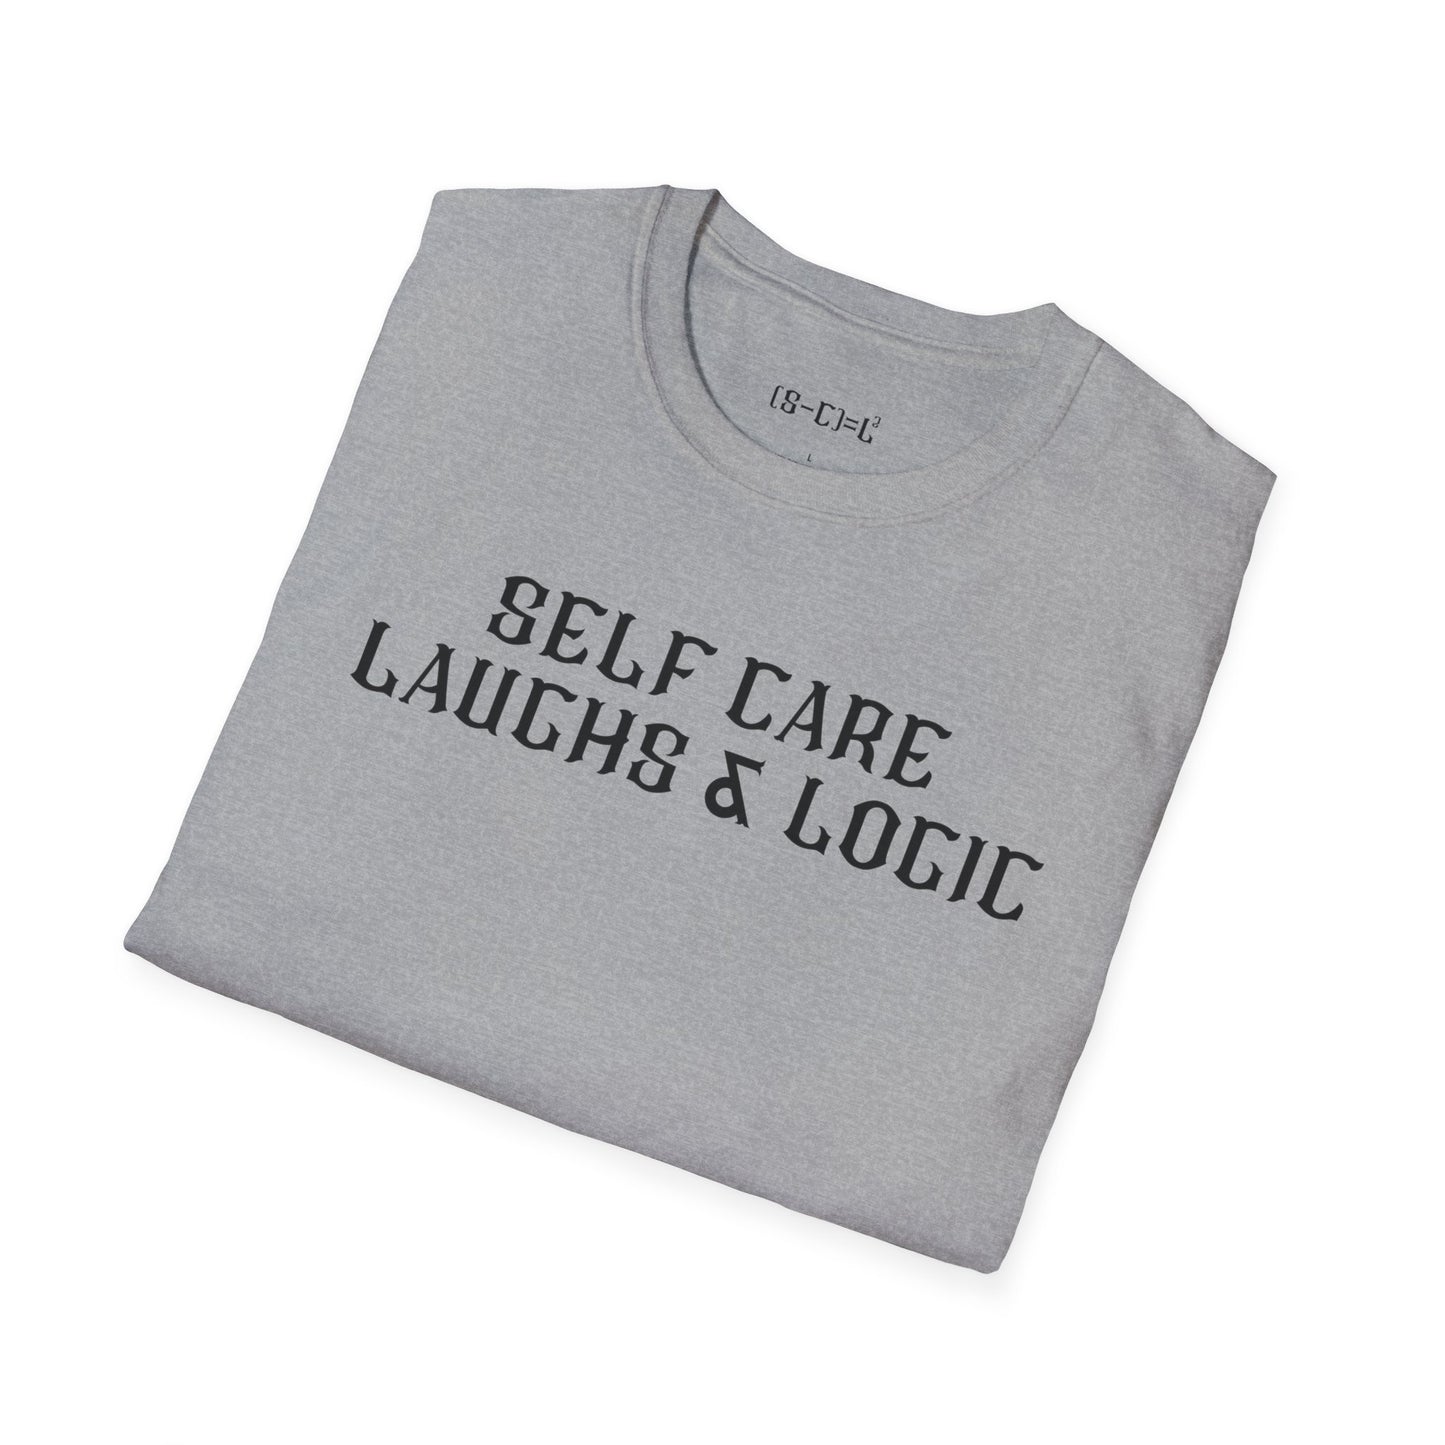 Harmony in Balance Tee: The Triad of Self Care Laughs & Logic Soft style T-Shirt